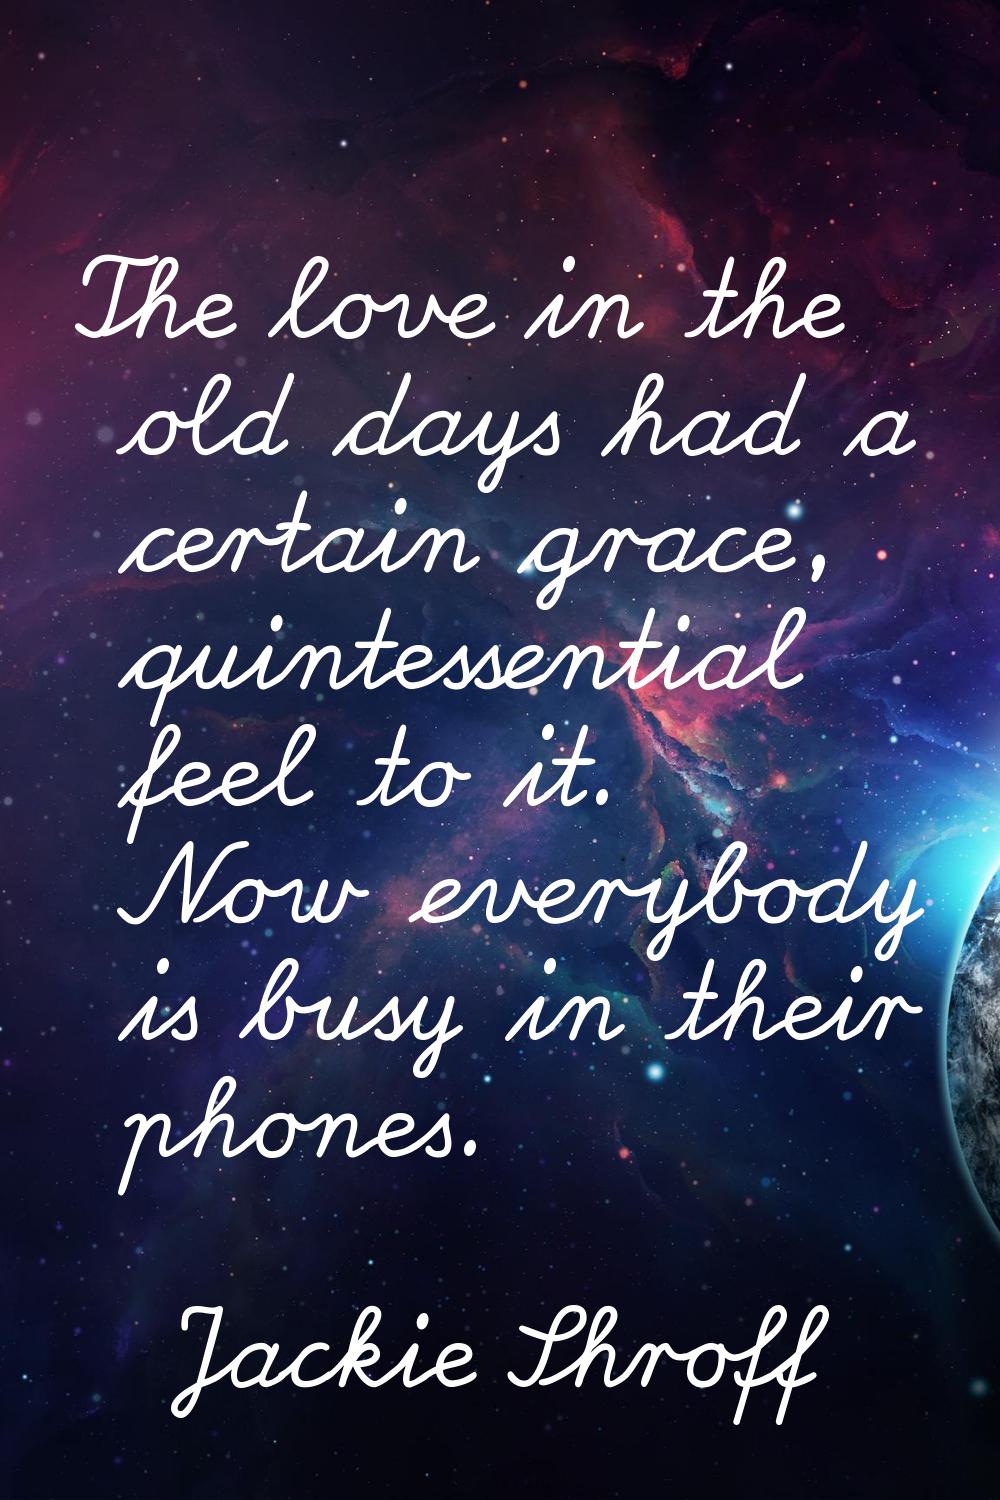 The love in the old days had a certain grace, quintessential feel to it. Now everybody is busy in t